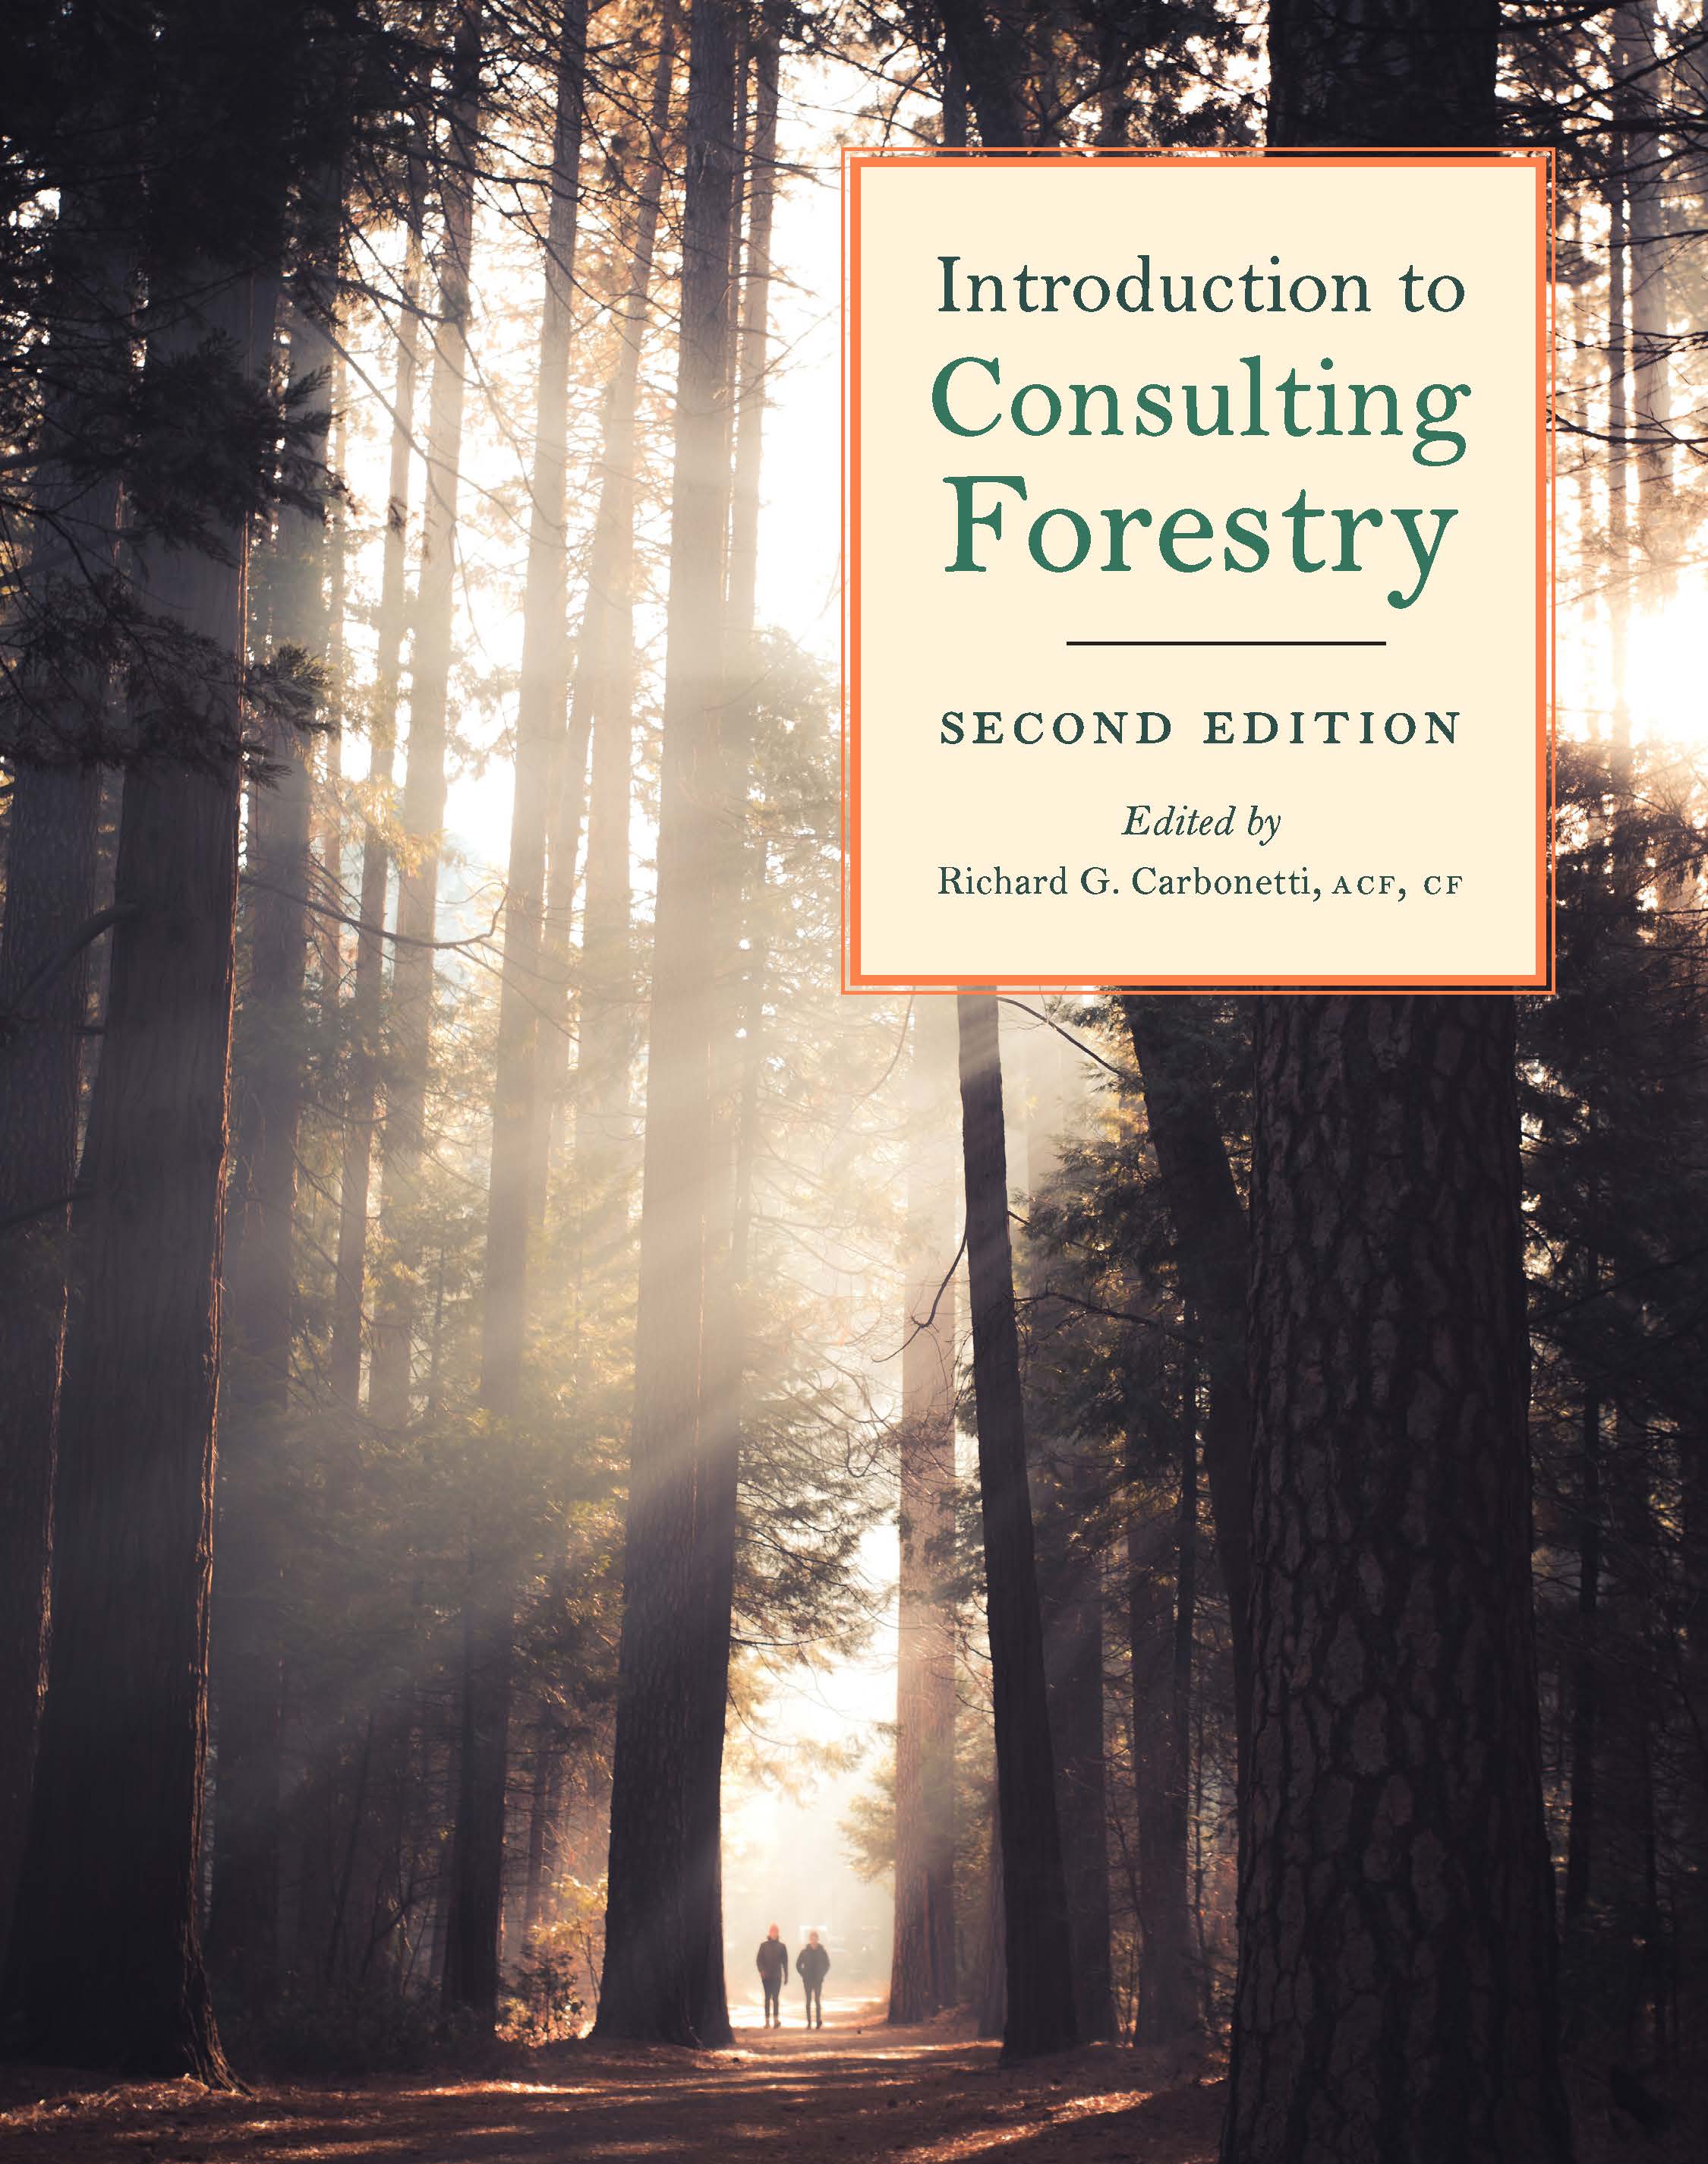 Introduction to Consulting Forestry, Second Edition